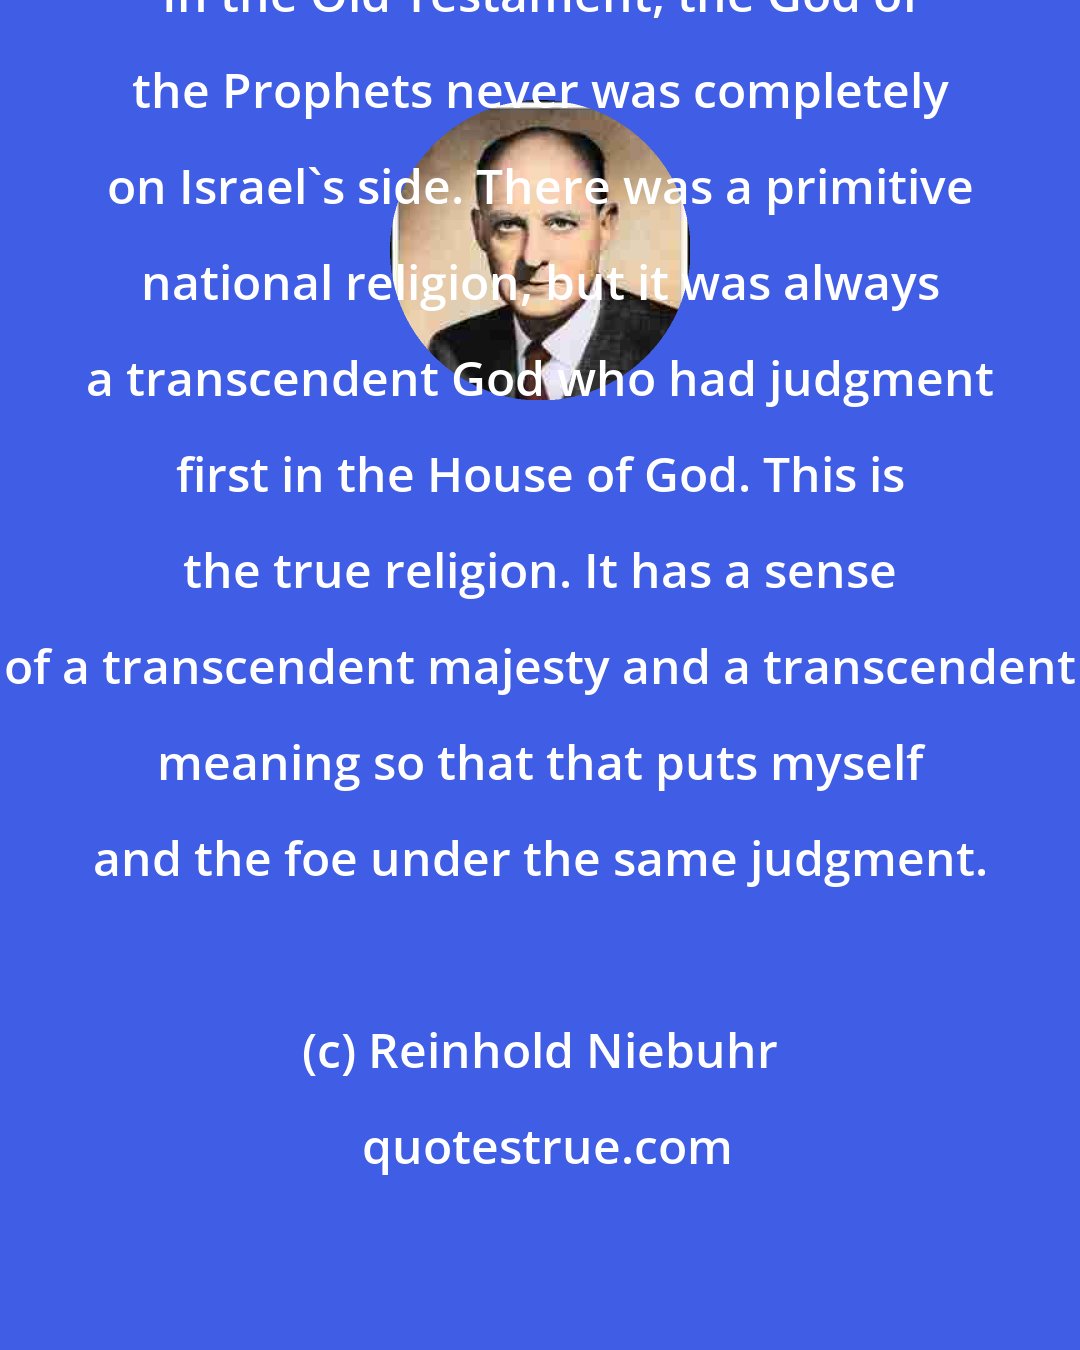 Reinhold Niebuhr: In the Old Testament, the God of the Prophets never was completely on Israel's side. There was a primitive national religion, but it was always a transcendent God who had judgment first in the House of God. This is the true religion. It has a sense of a transcendent majesty and a transcendent meaning so that that puts myself and the foe under the same judgment.